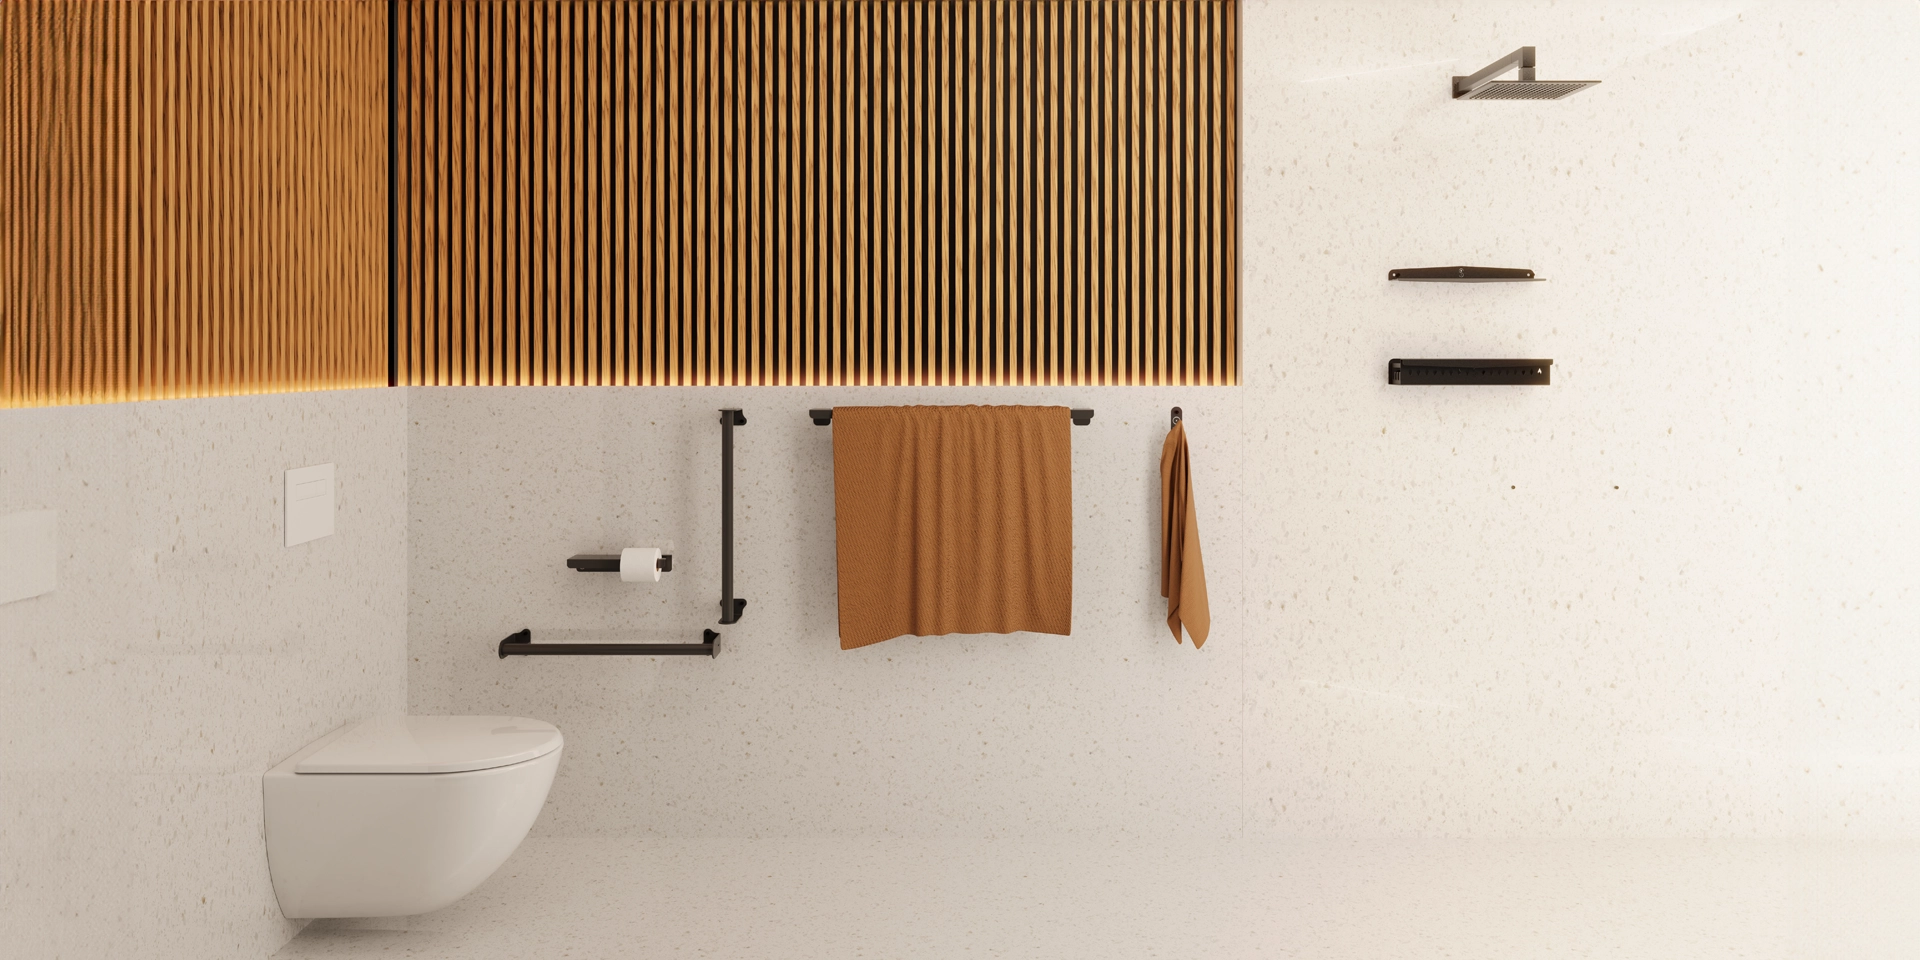 Bathroom fixtures with towel rail, wall hook, toilet holder, shower shelf and tray